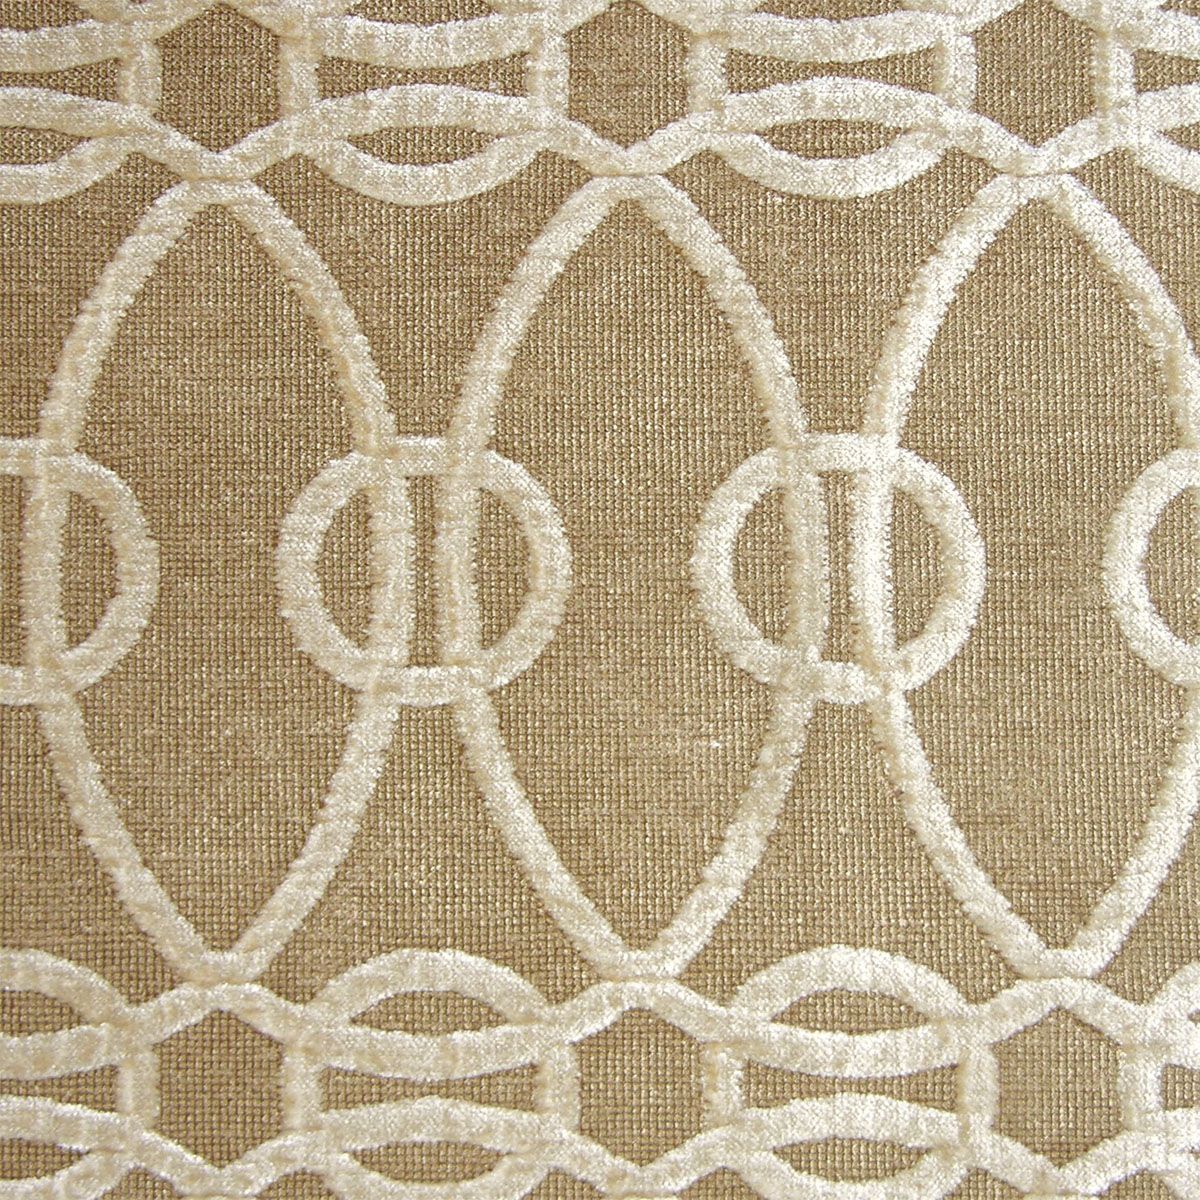 Interlochen fabric in raffia color - pattern number BV 02053110 - by Scalamandre in the Old World Weavers collection